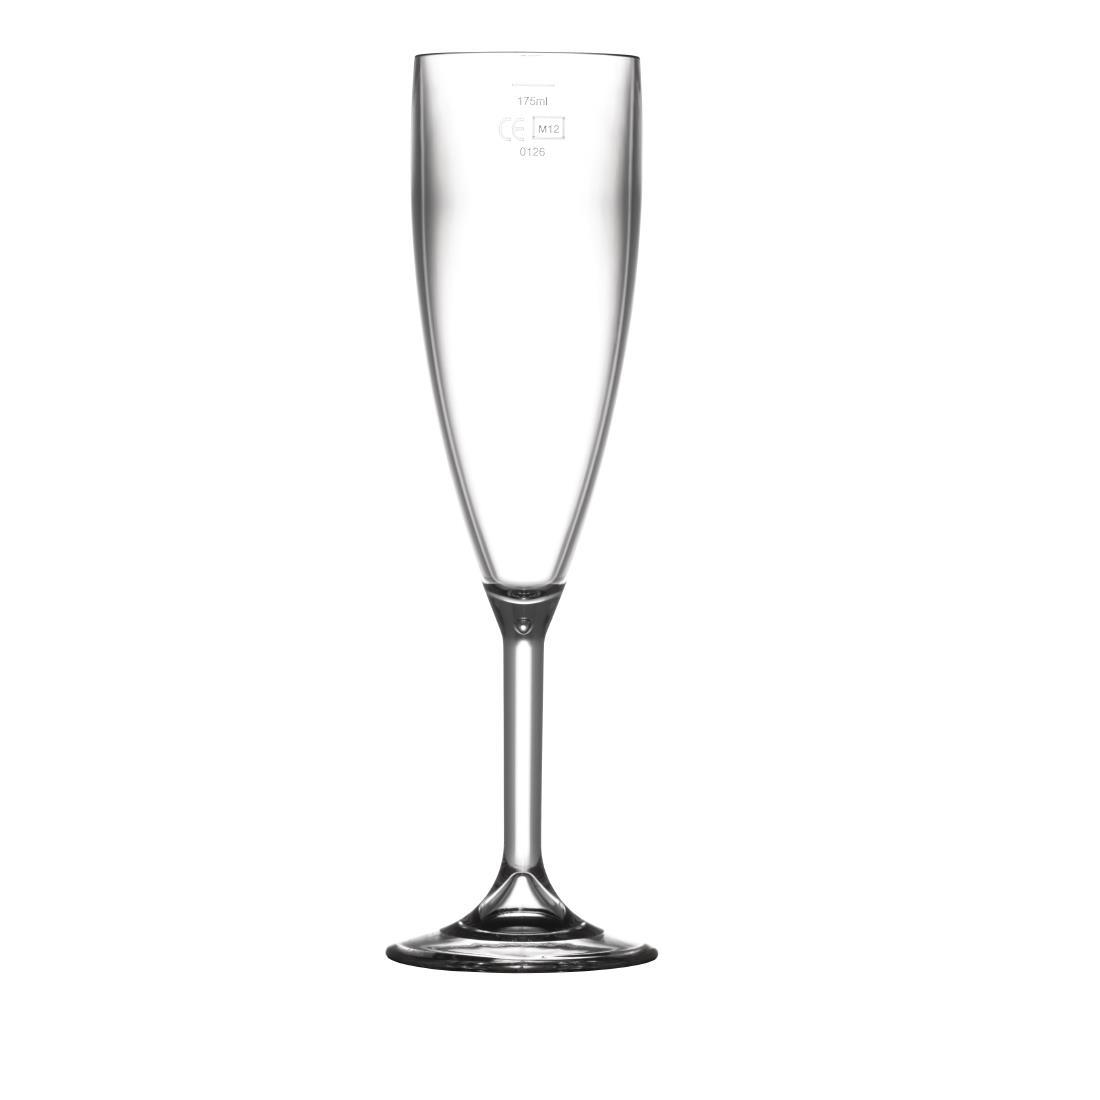 BBP Polycarbonate Champagne Flutes 200ml CE Marked at 175ml (Pack of 12) - CG945  - 1